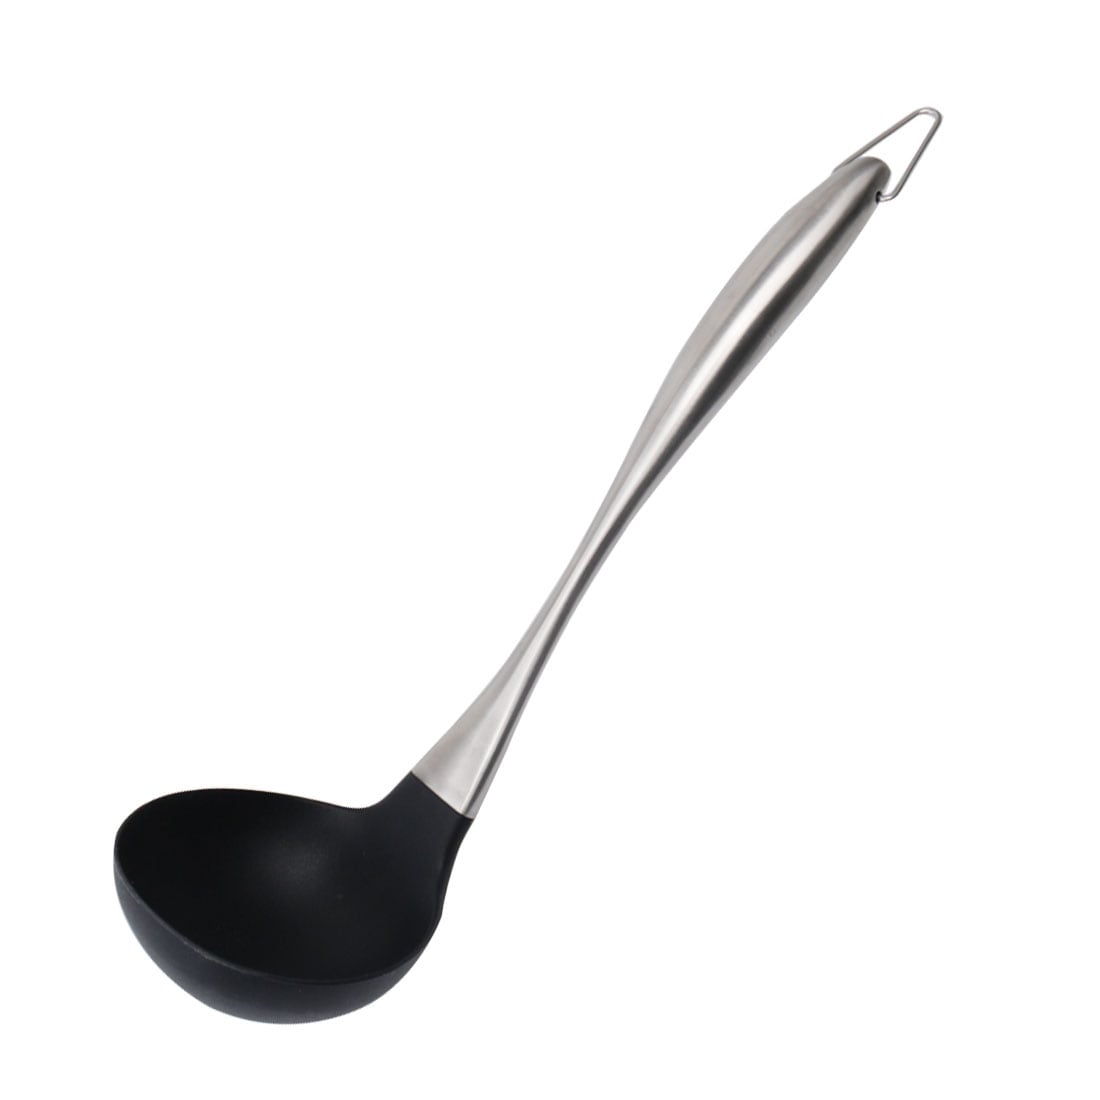 https://ak1.ostkcdn.com/images/products/is/images/direct/e989352d801e72eafe62d008b3d92773a843c663/Silicone-Soup-Ladle-Spoon-Stainless-Steel-Handle-Cookware-Utensil.jpg